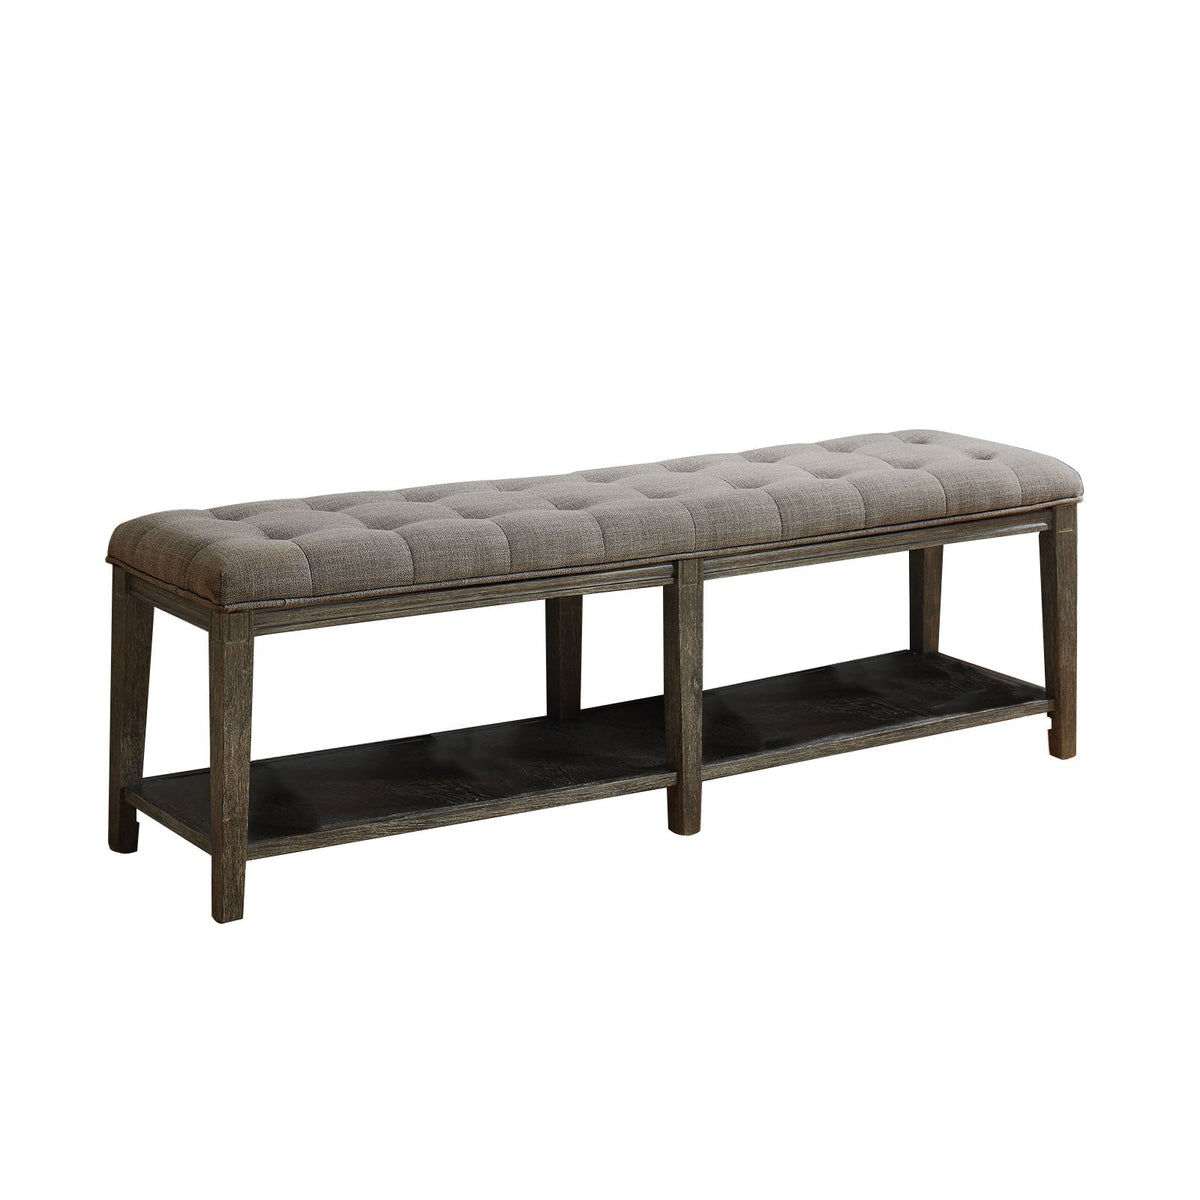 Traditional Bench with Button Tufted Seat and Open Bottom Shelf in Gray - BM208035